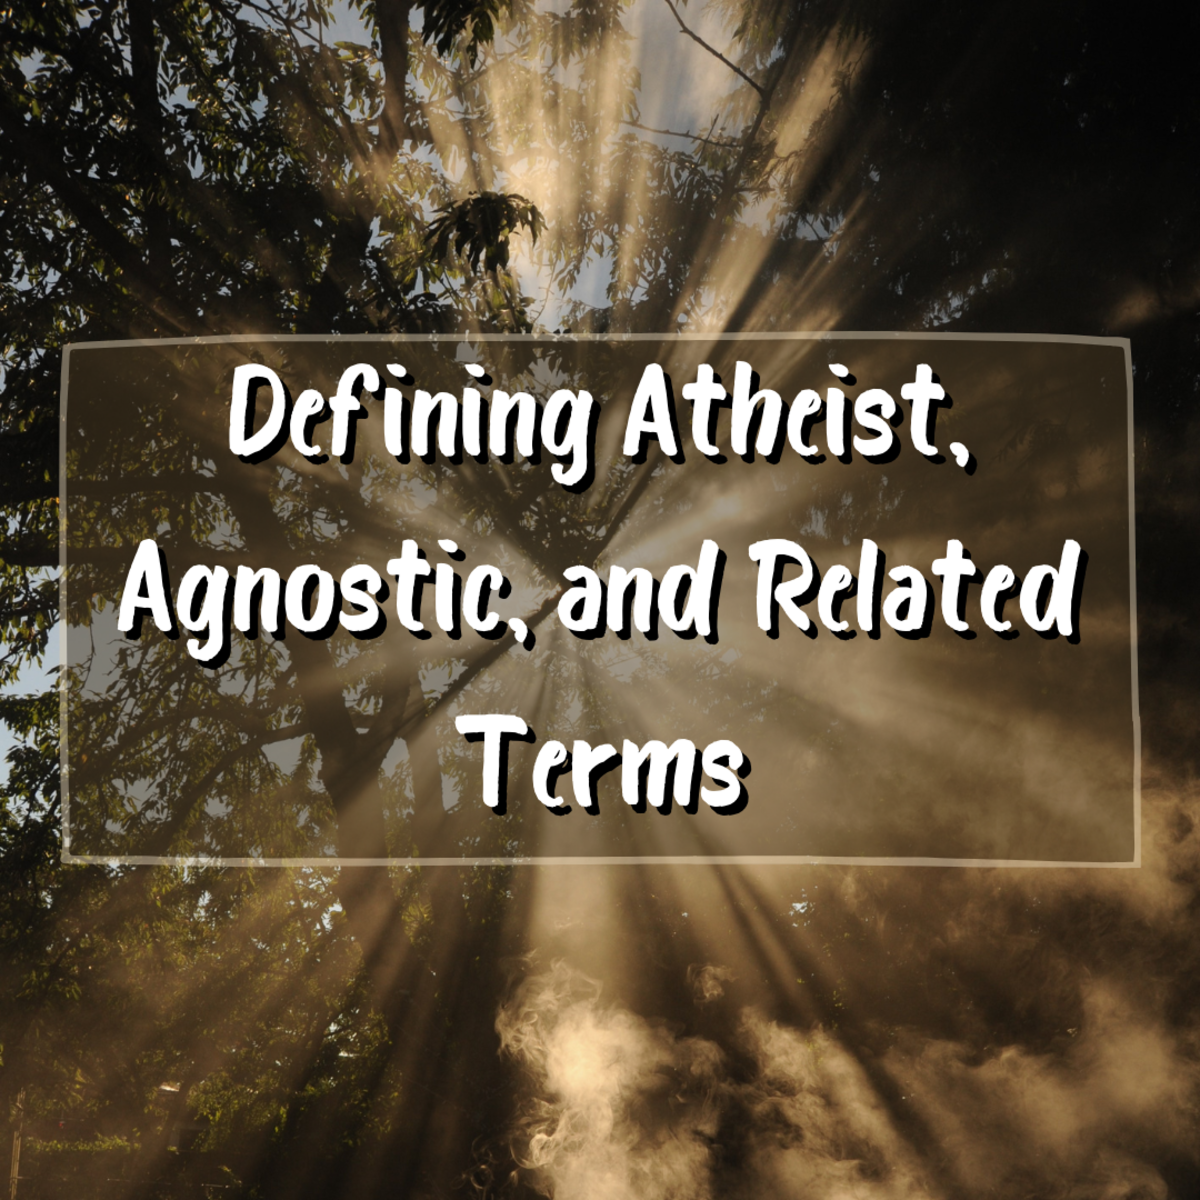 What Is the Definition of Atheist and Agnostic?